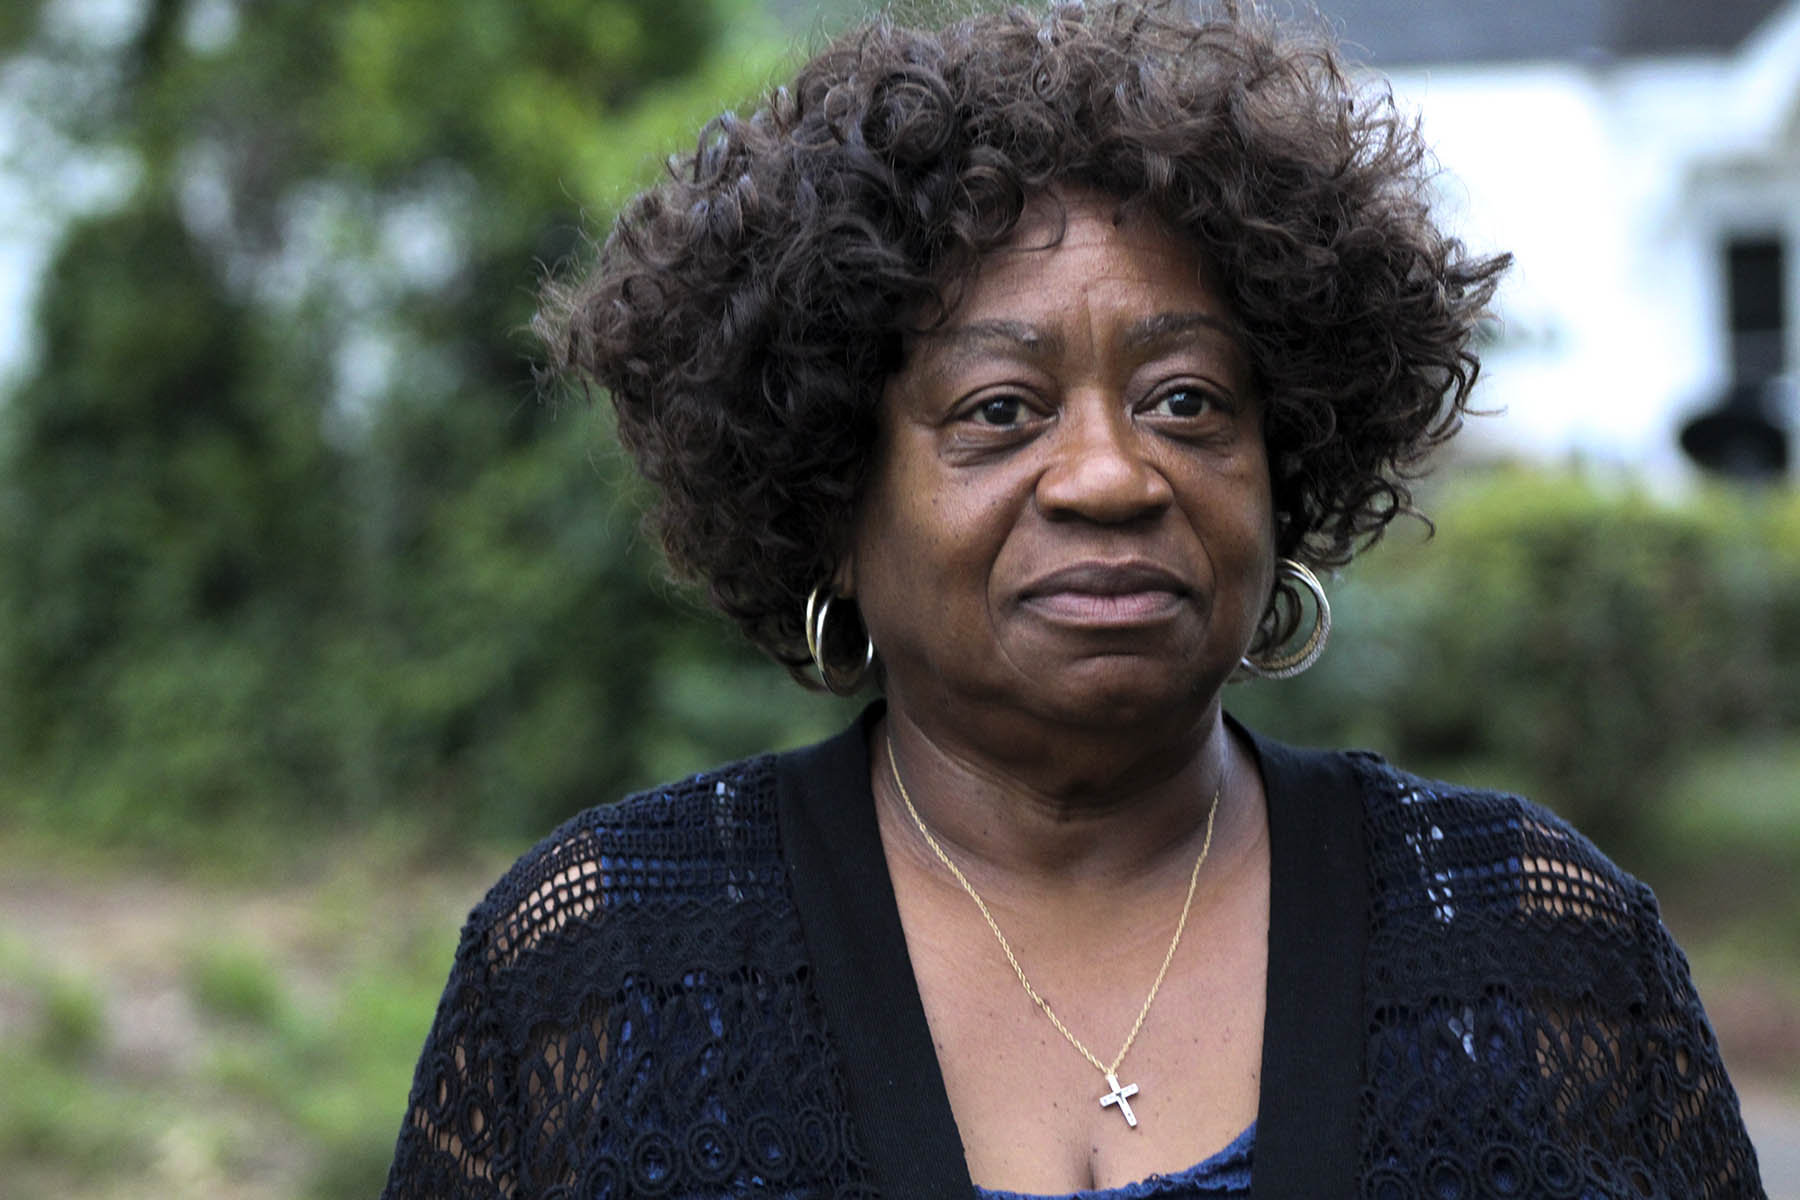 Juanita Wilson is a native of Americus and protested during the civil rights era. She was arrested during the summer of 1963 and held in an abandoned stockade near Leesburg. (Photo and audio by Phillip Jackson/News21)